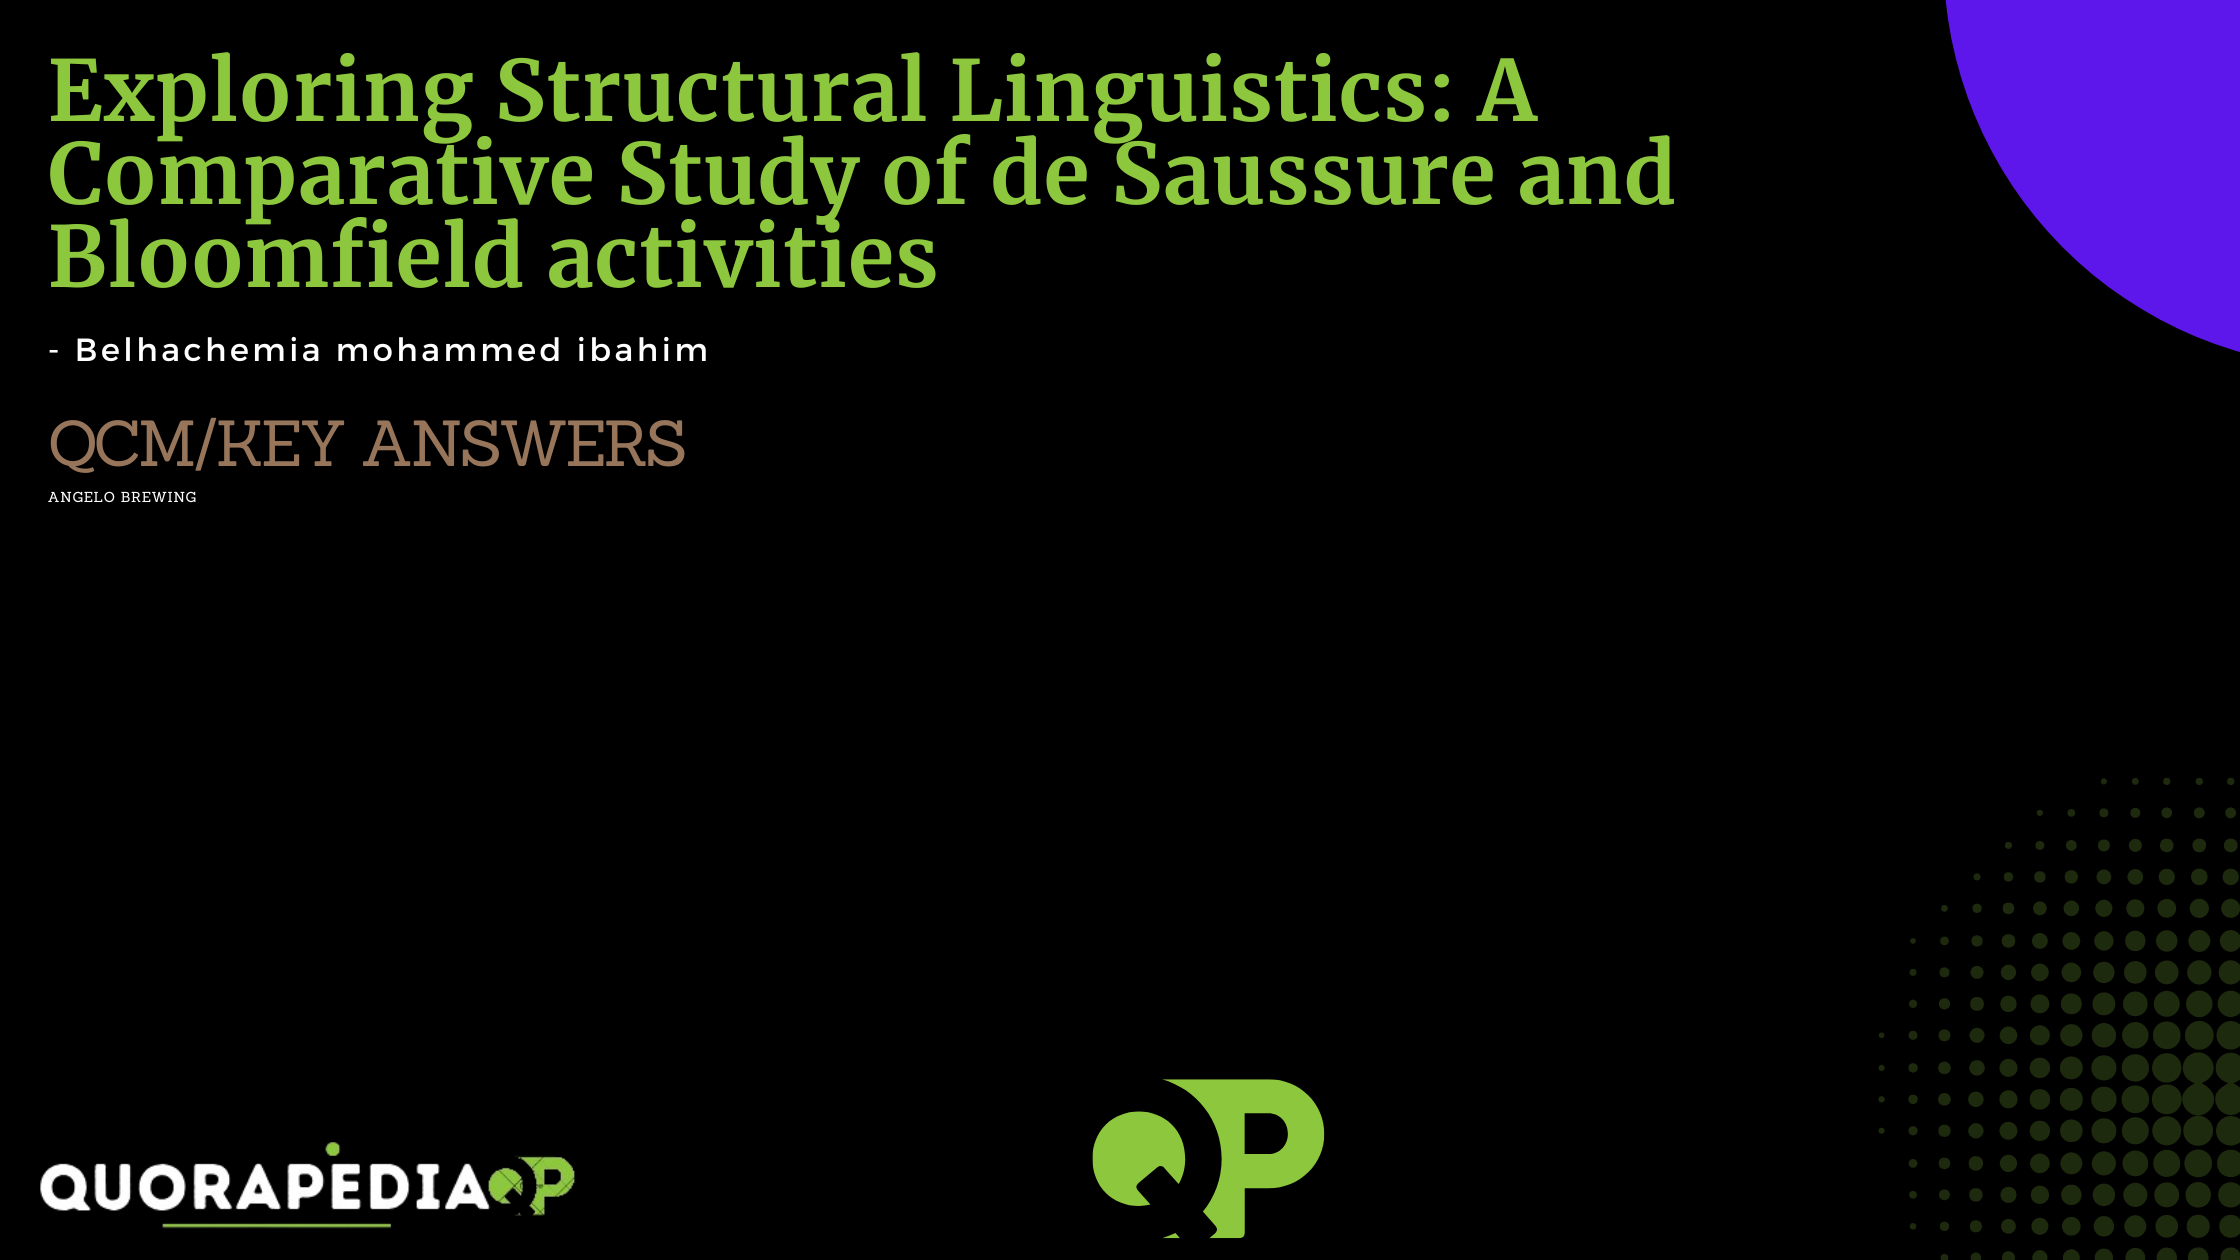 Exploring Structural Linguistics: A Comparative Study of de Saussure and Bloomfield activities